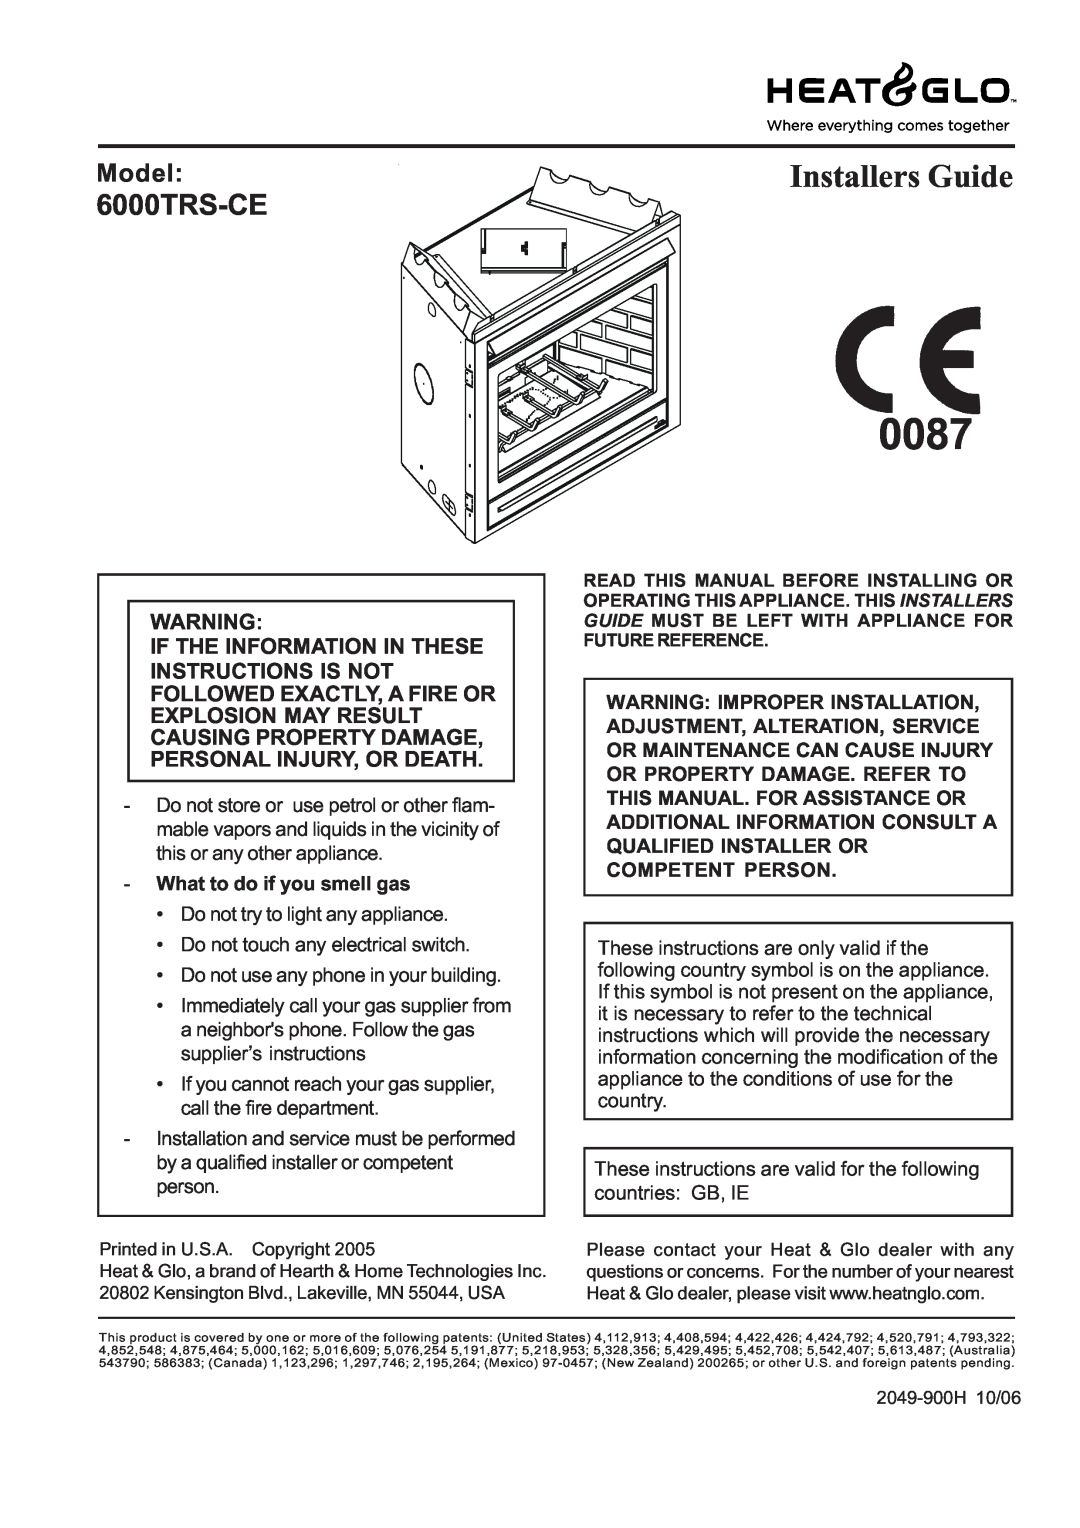 Heat & Glo LifeStyle 6000TRS-CD manual 0087, 6000TRS-CE, Model, What to do if you smell gas, Installers Guide 